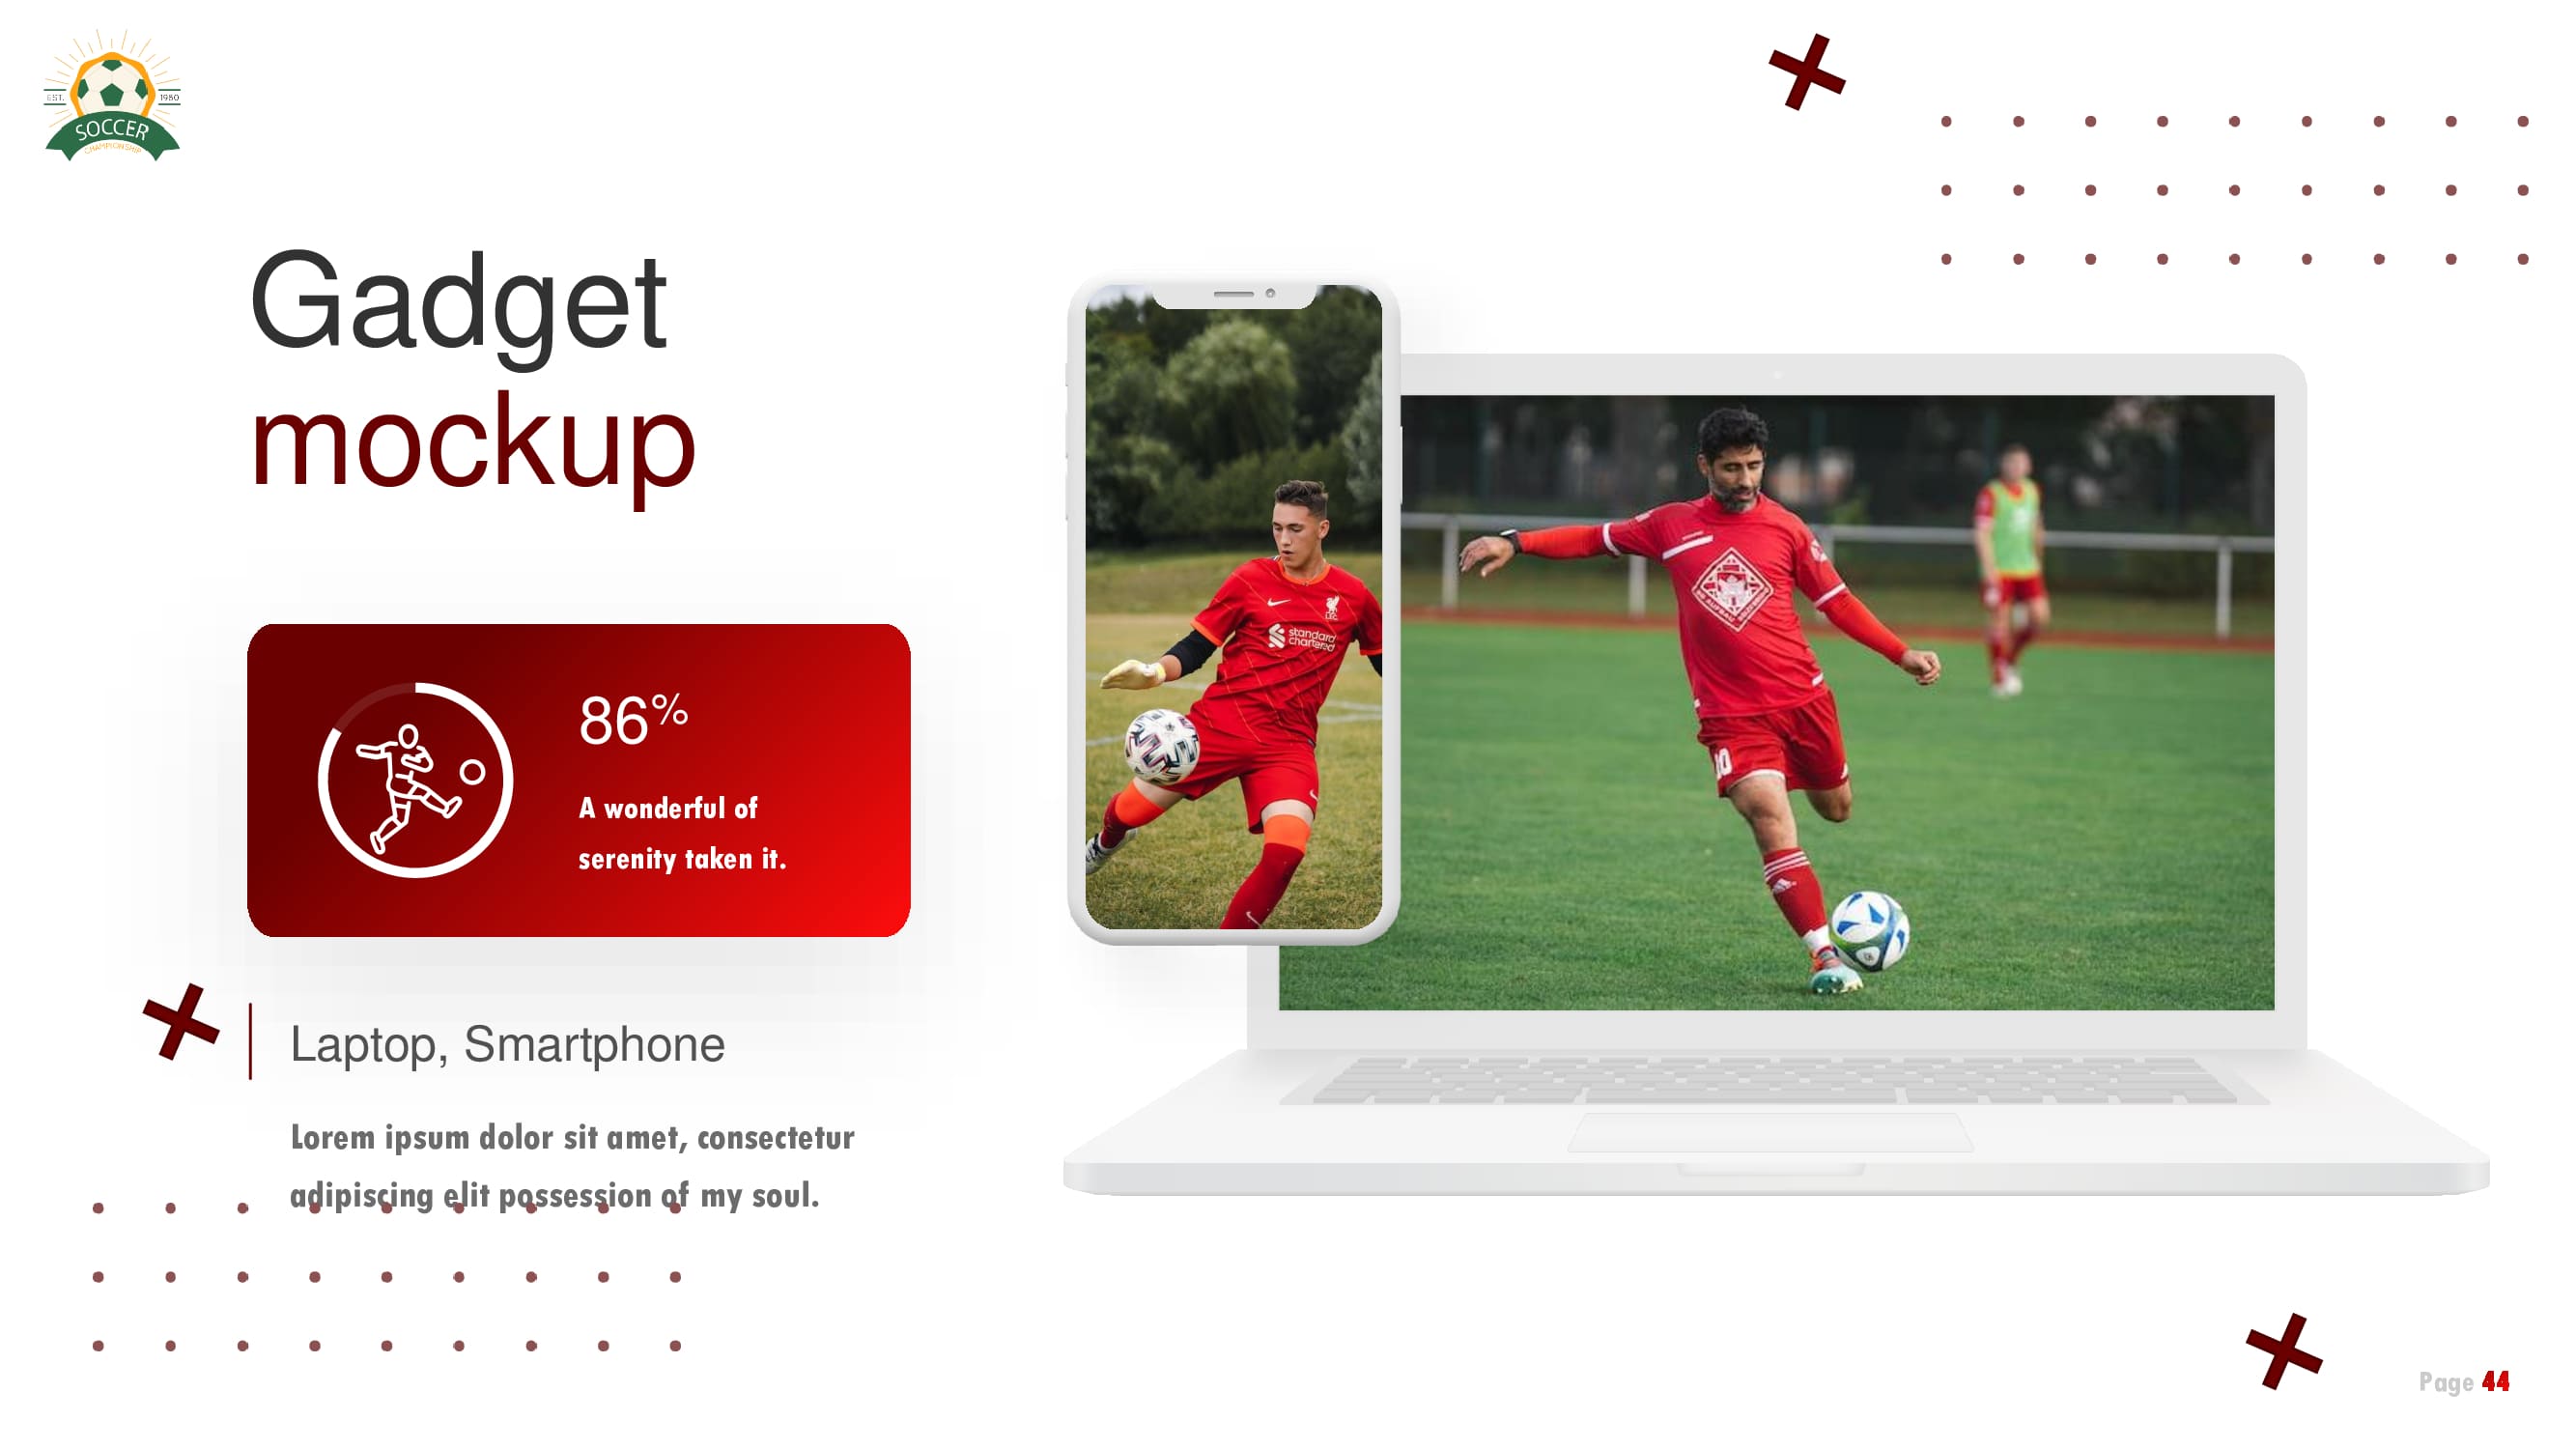 Beautiful slide for gadget mockup - laptop, smartphone with soccer images.